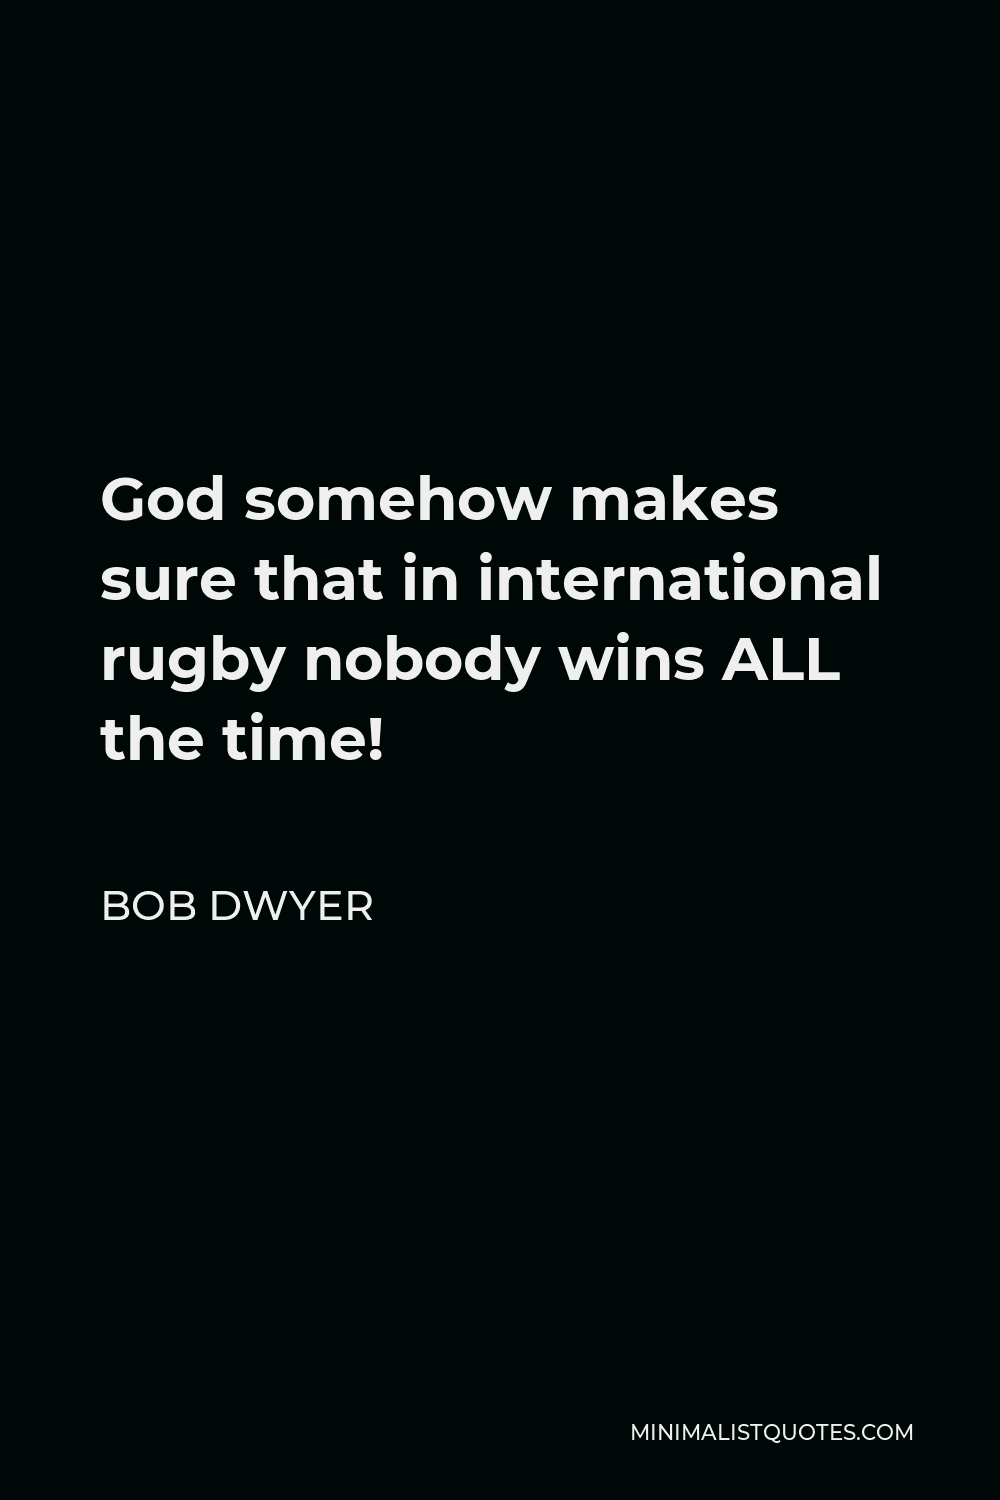 Bob Dwyer Quote - God somehow makes sure that in international rugby nobody wins ALL the time!